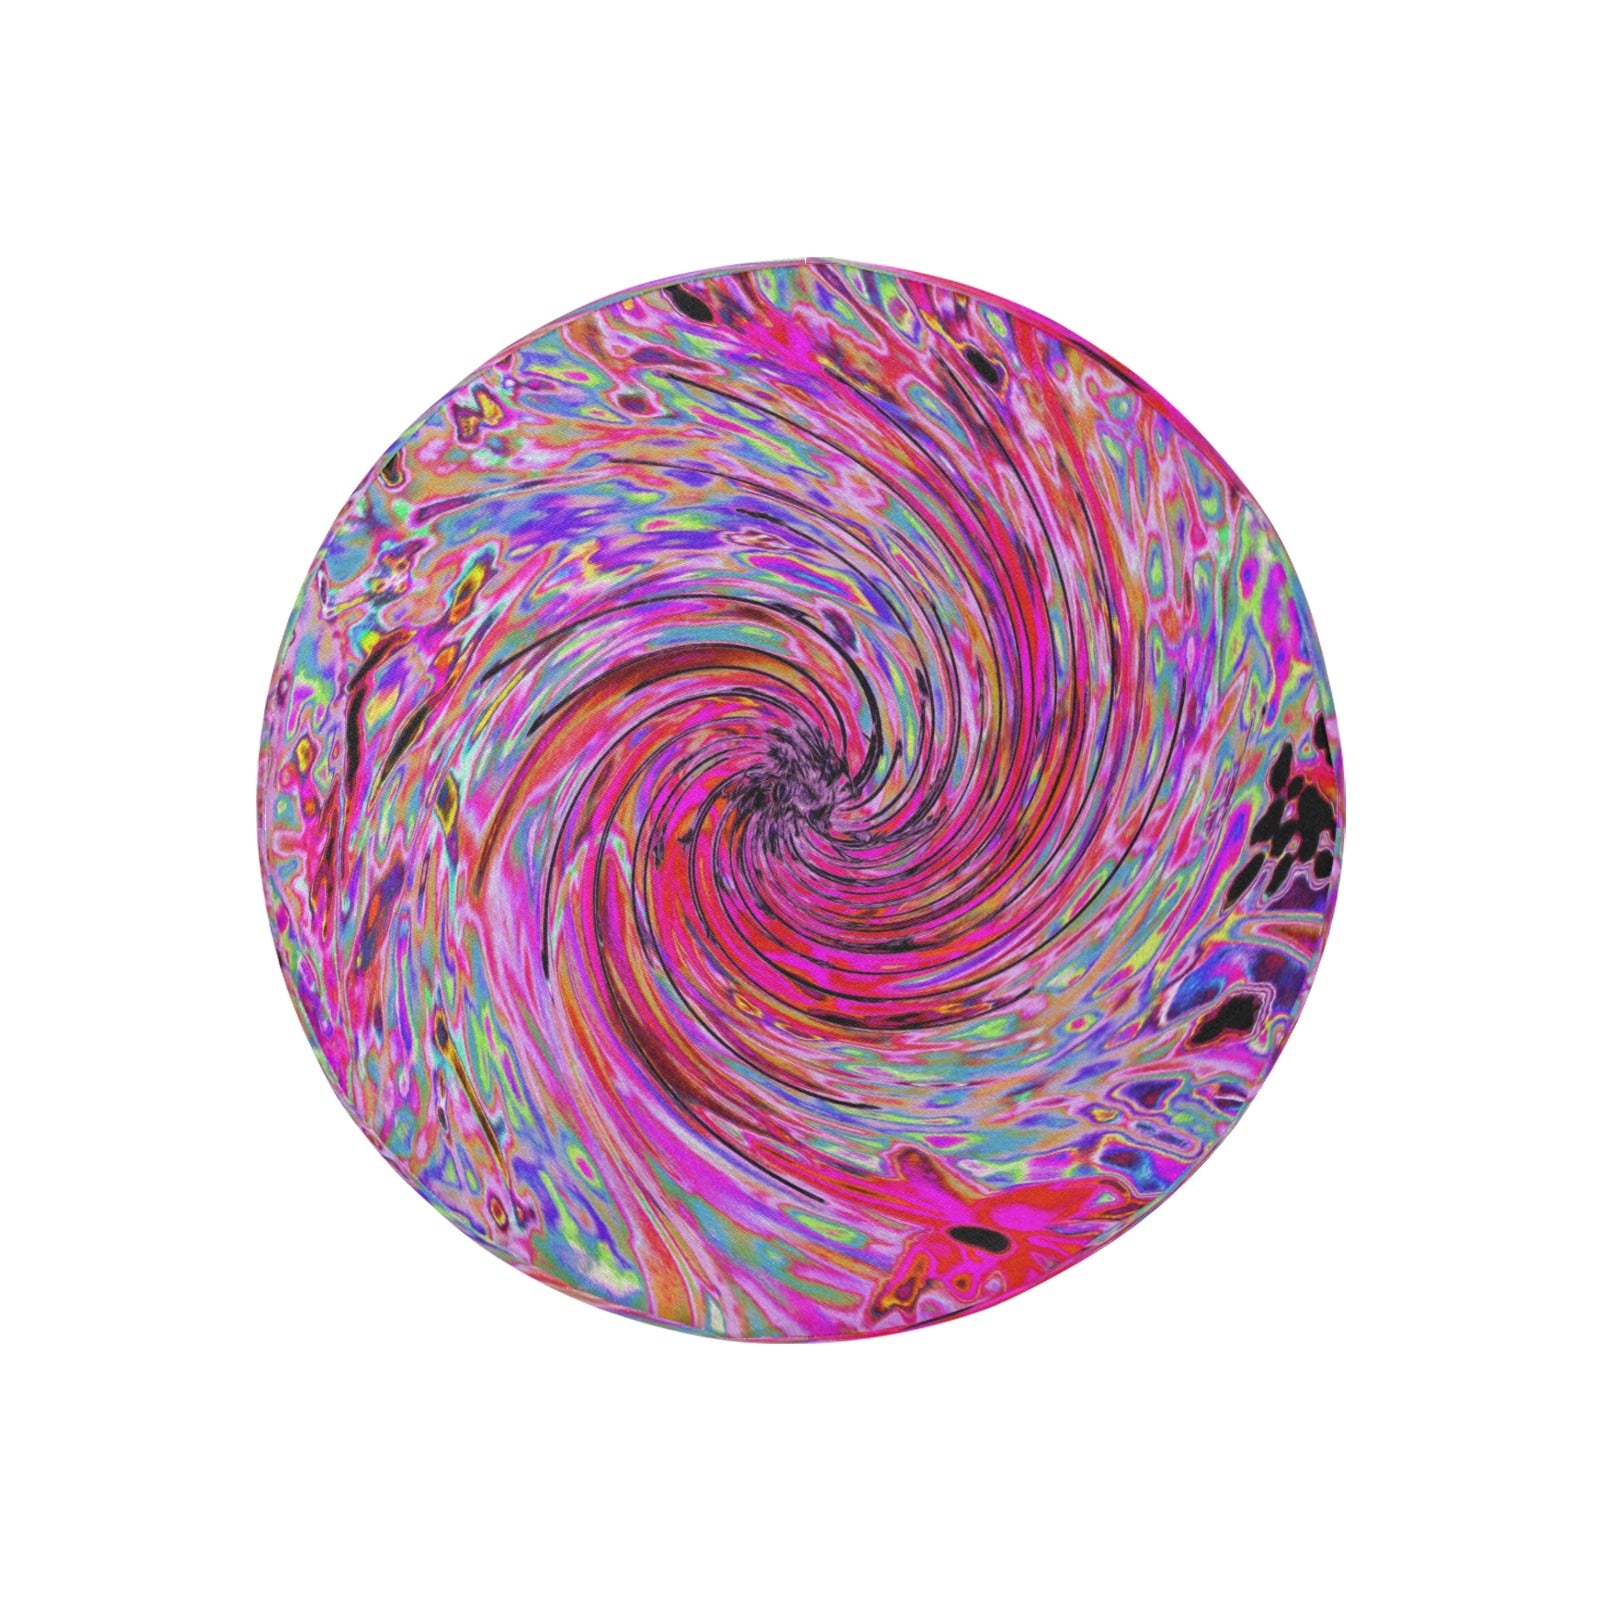 Spare Tire Covers, Cool Abstract Retro Hot Pink and Red Floral Swirl - Small